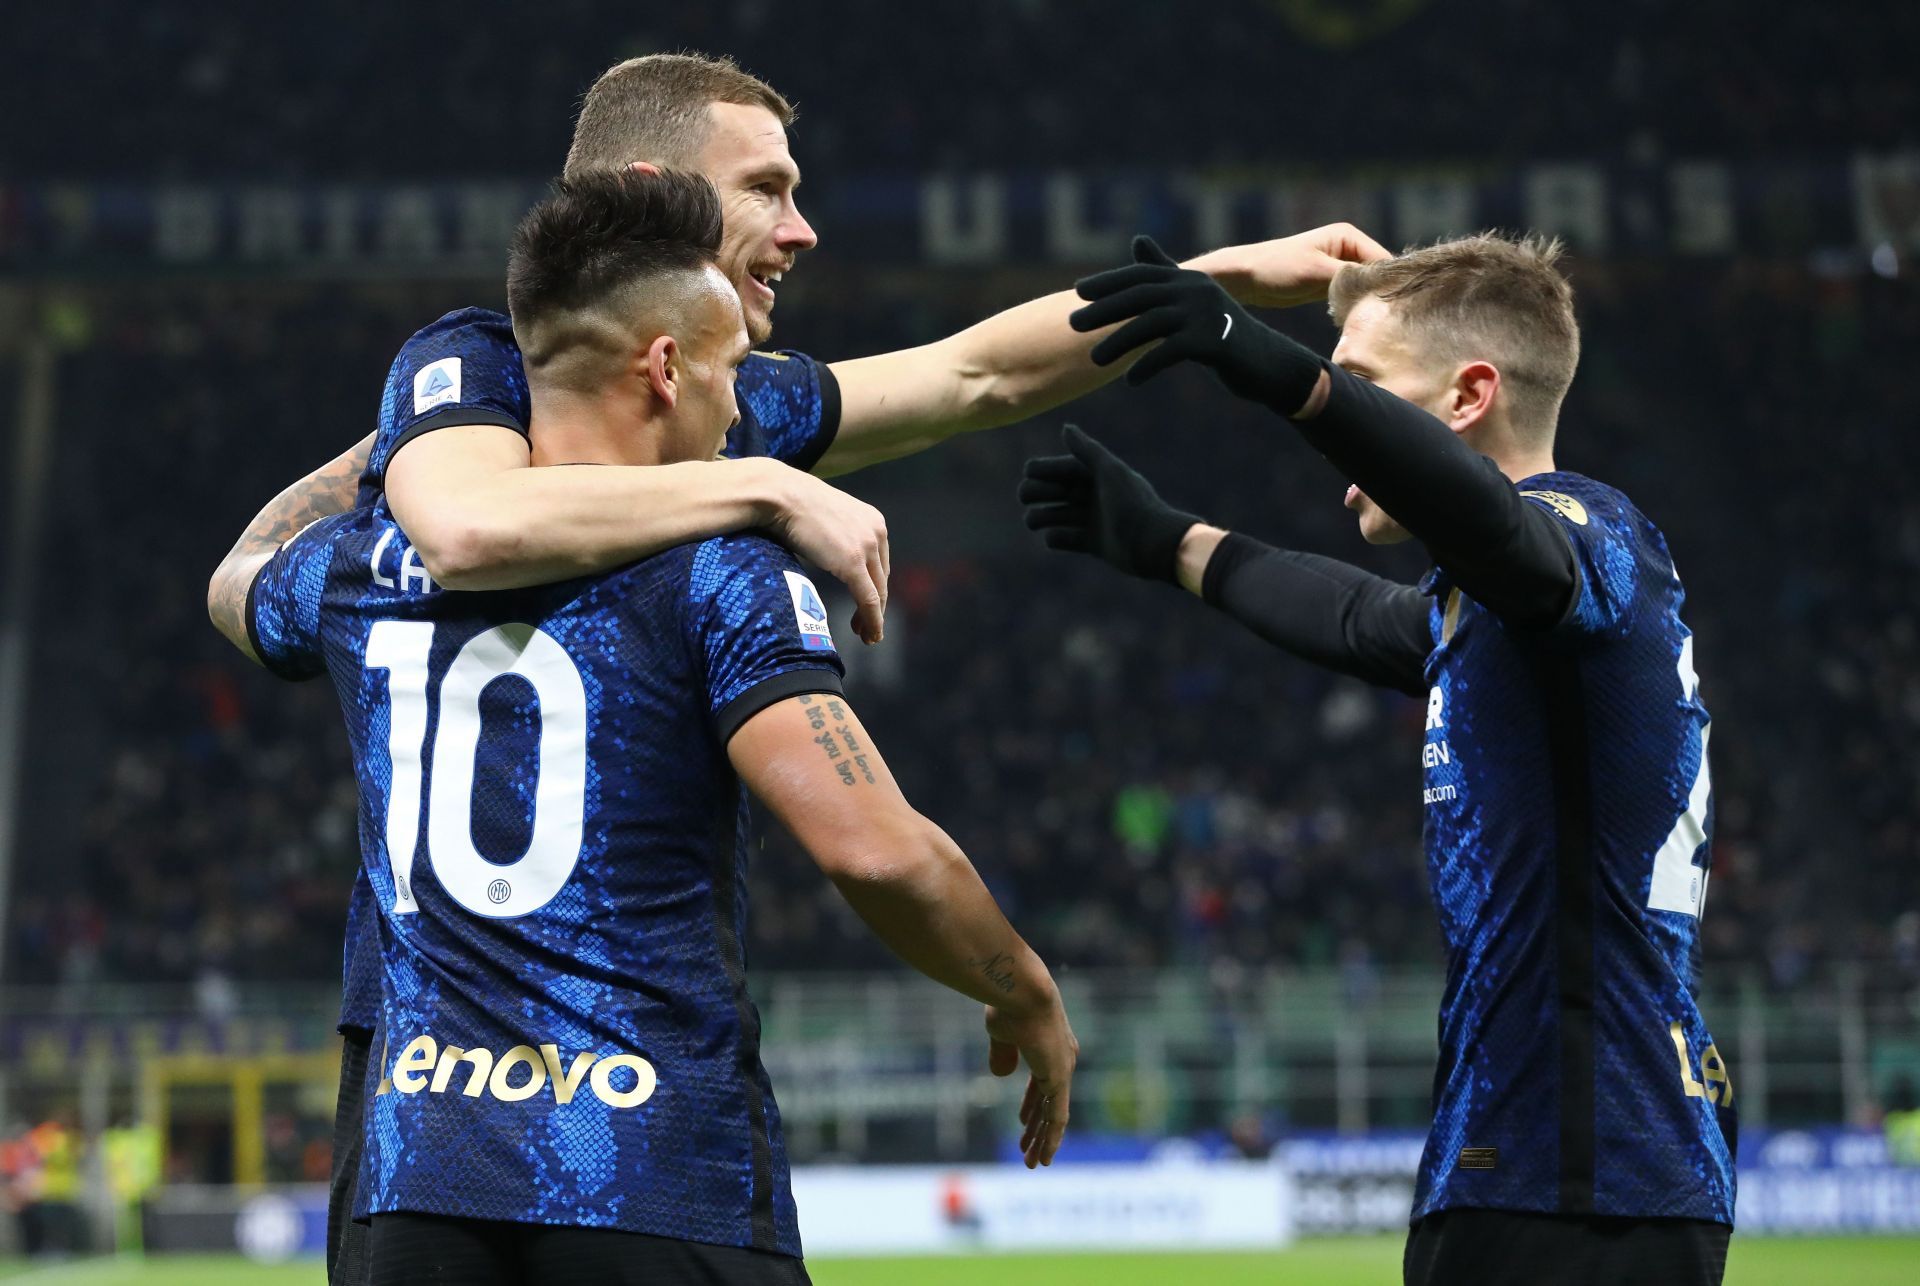 Inter Milan have a point to prove